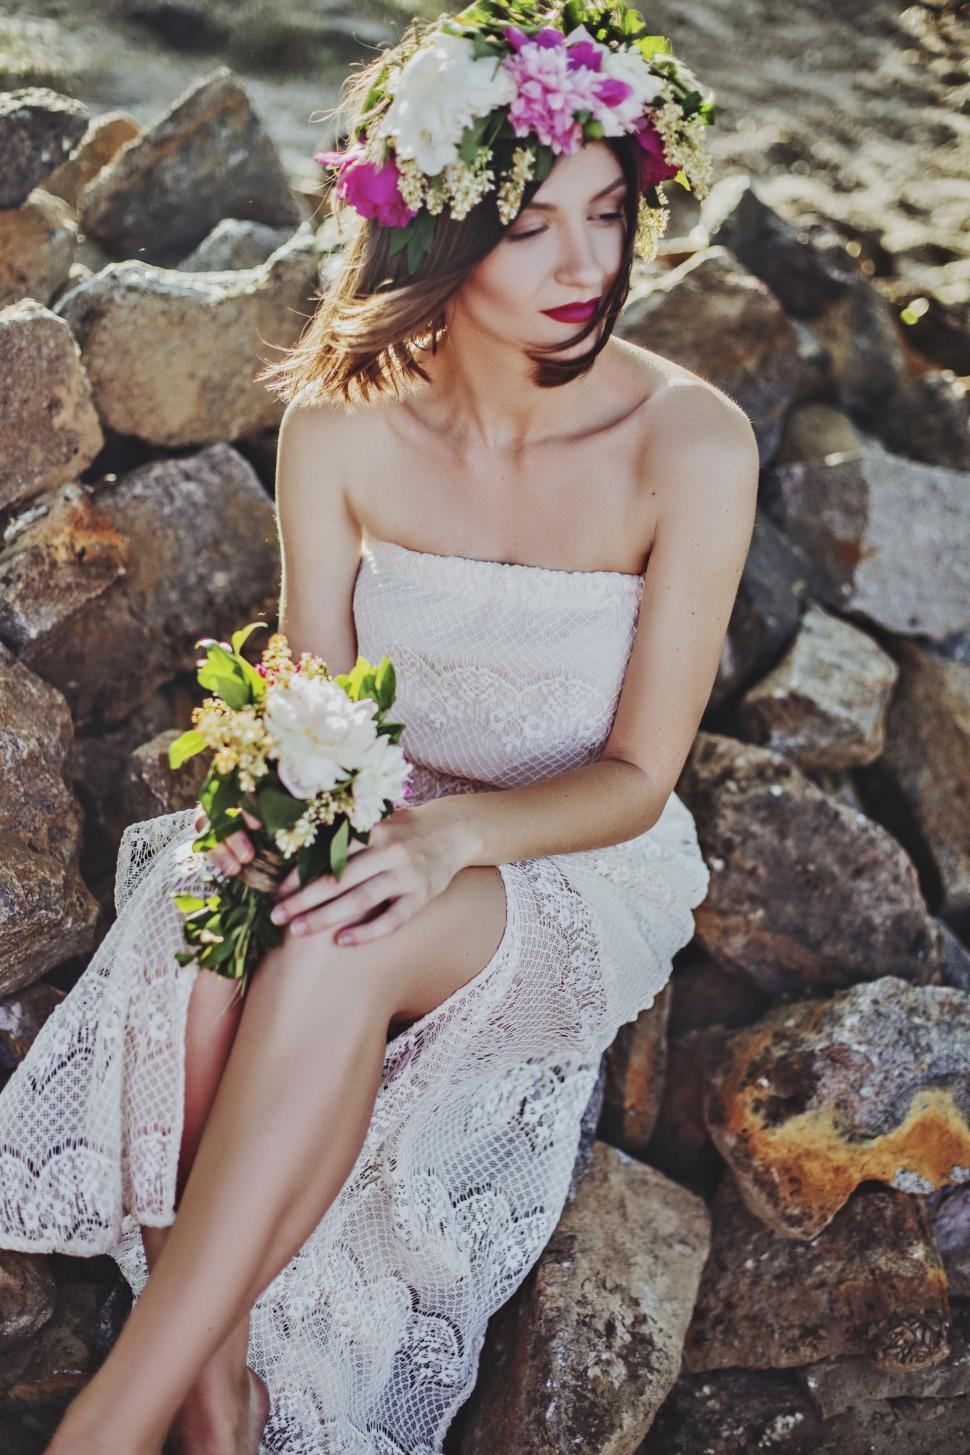 Free Image of Woman Sitting on Pile of Rocks With Flowers in Hair 